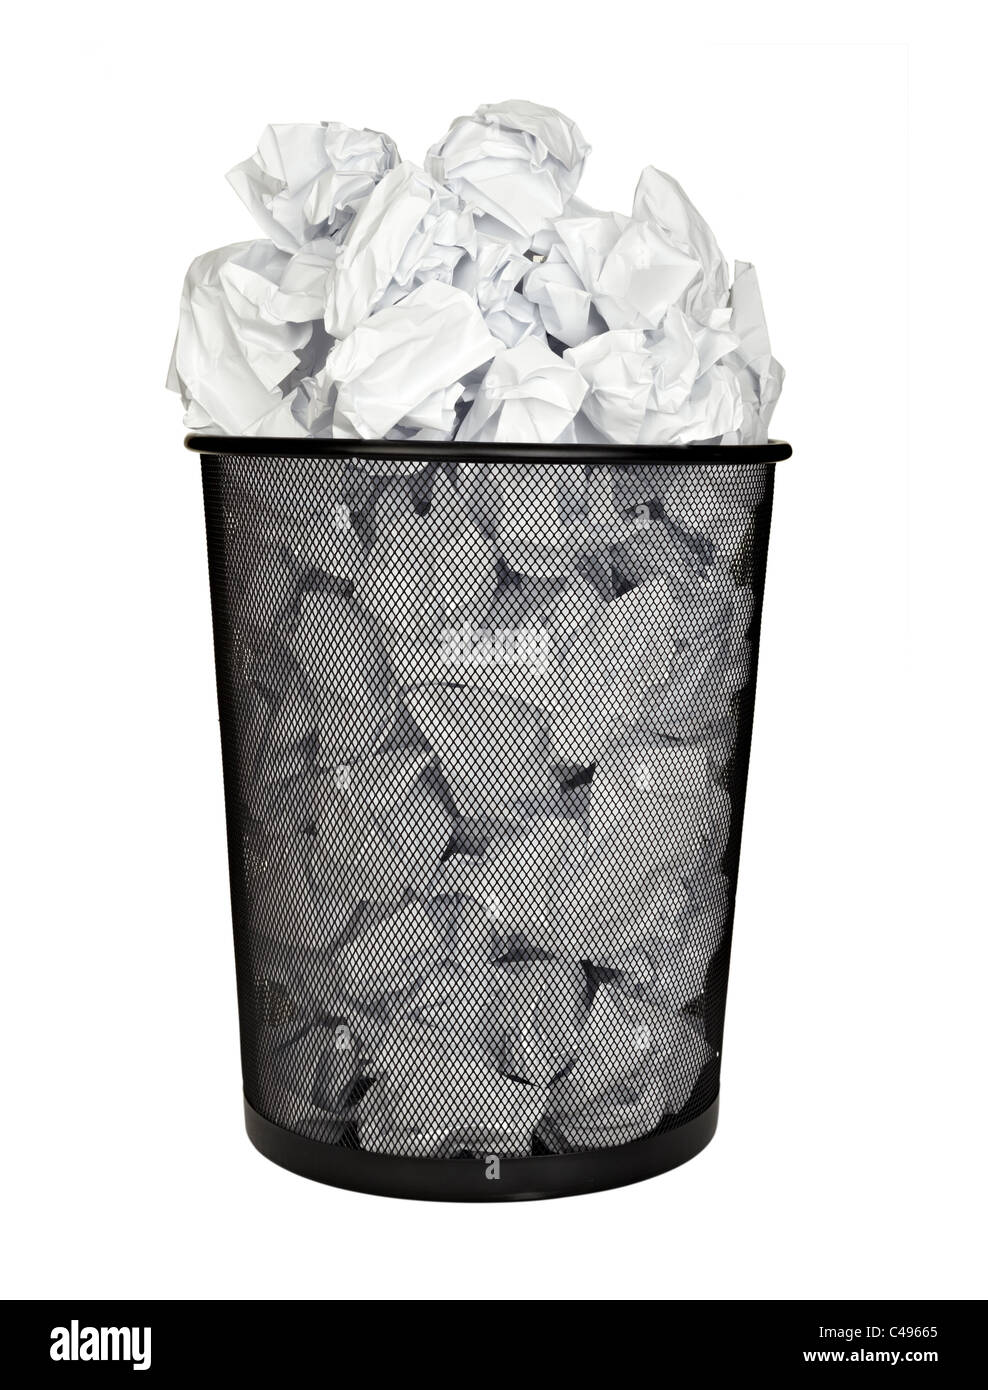 close up of waste paper basket Stock Photo